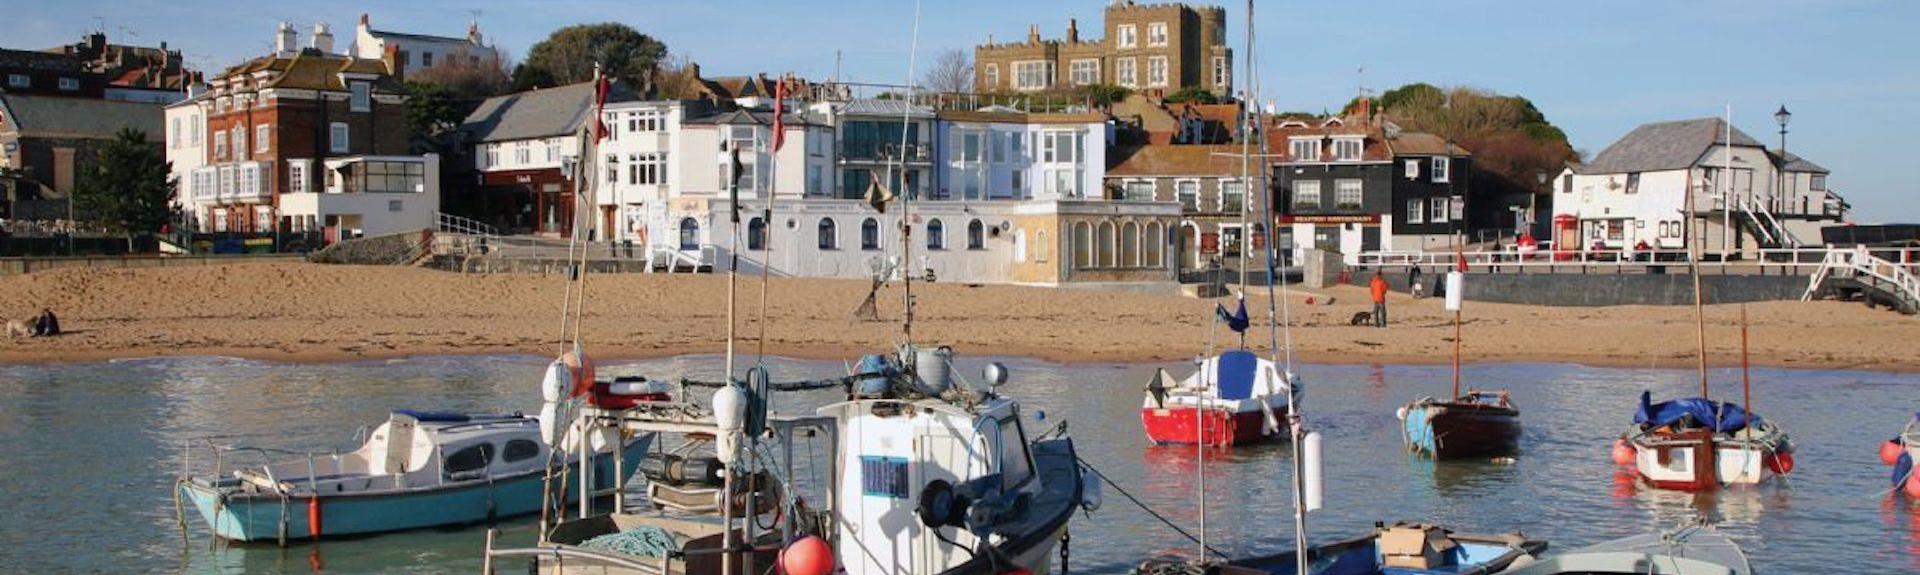 Fishing boats in Broadstairs moored off a shingle beach behind which stand a huddle of old fishermen's cottages